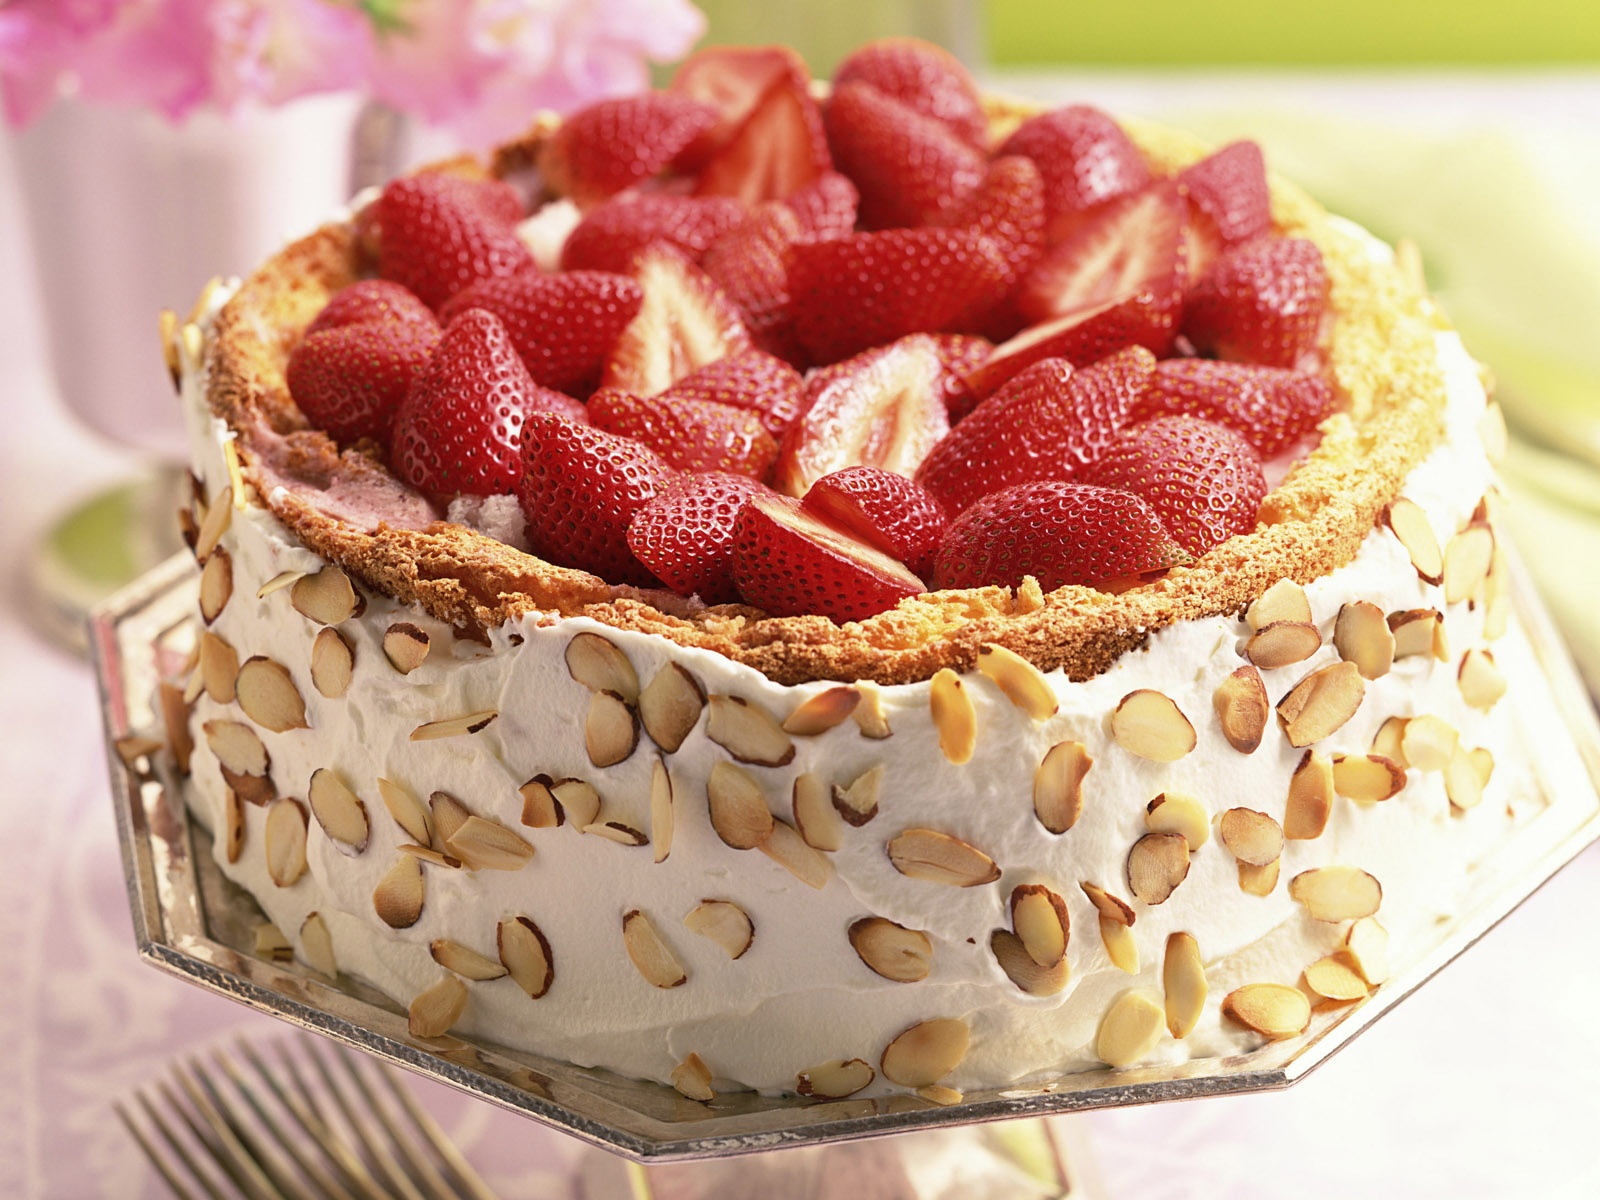 Strawberries and Cream Cheesecake Laced with Almonds by Gra